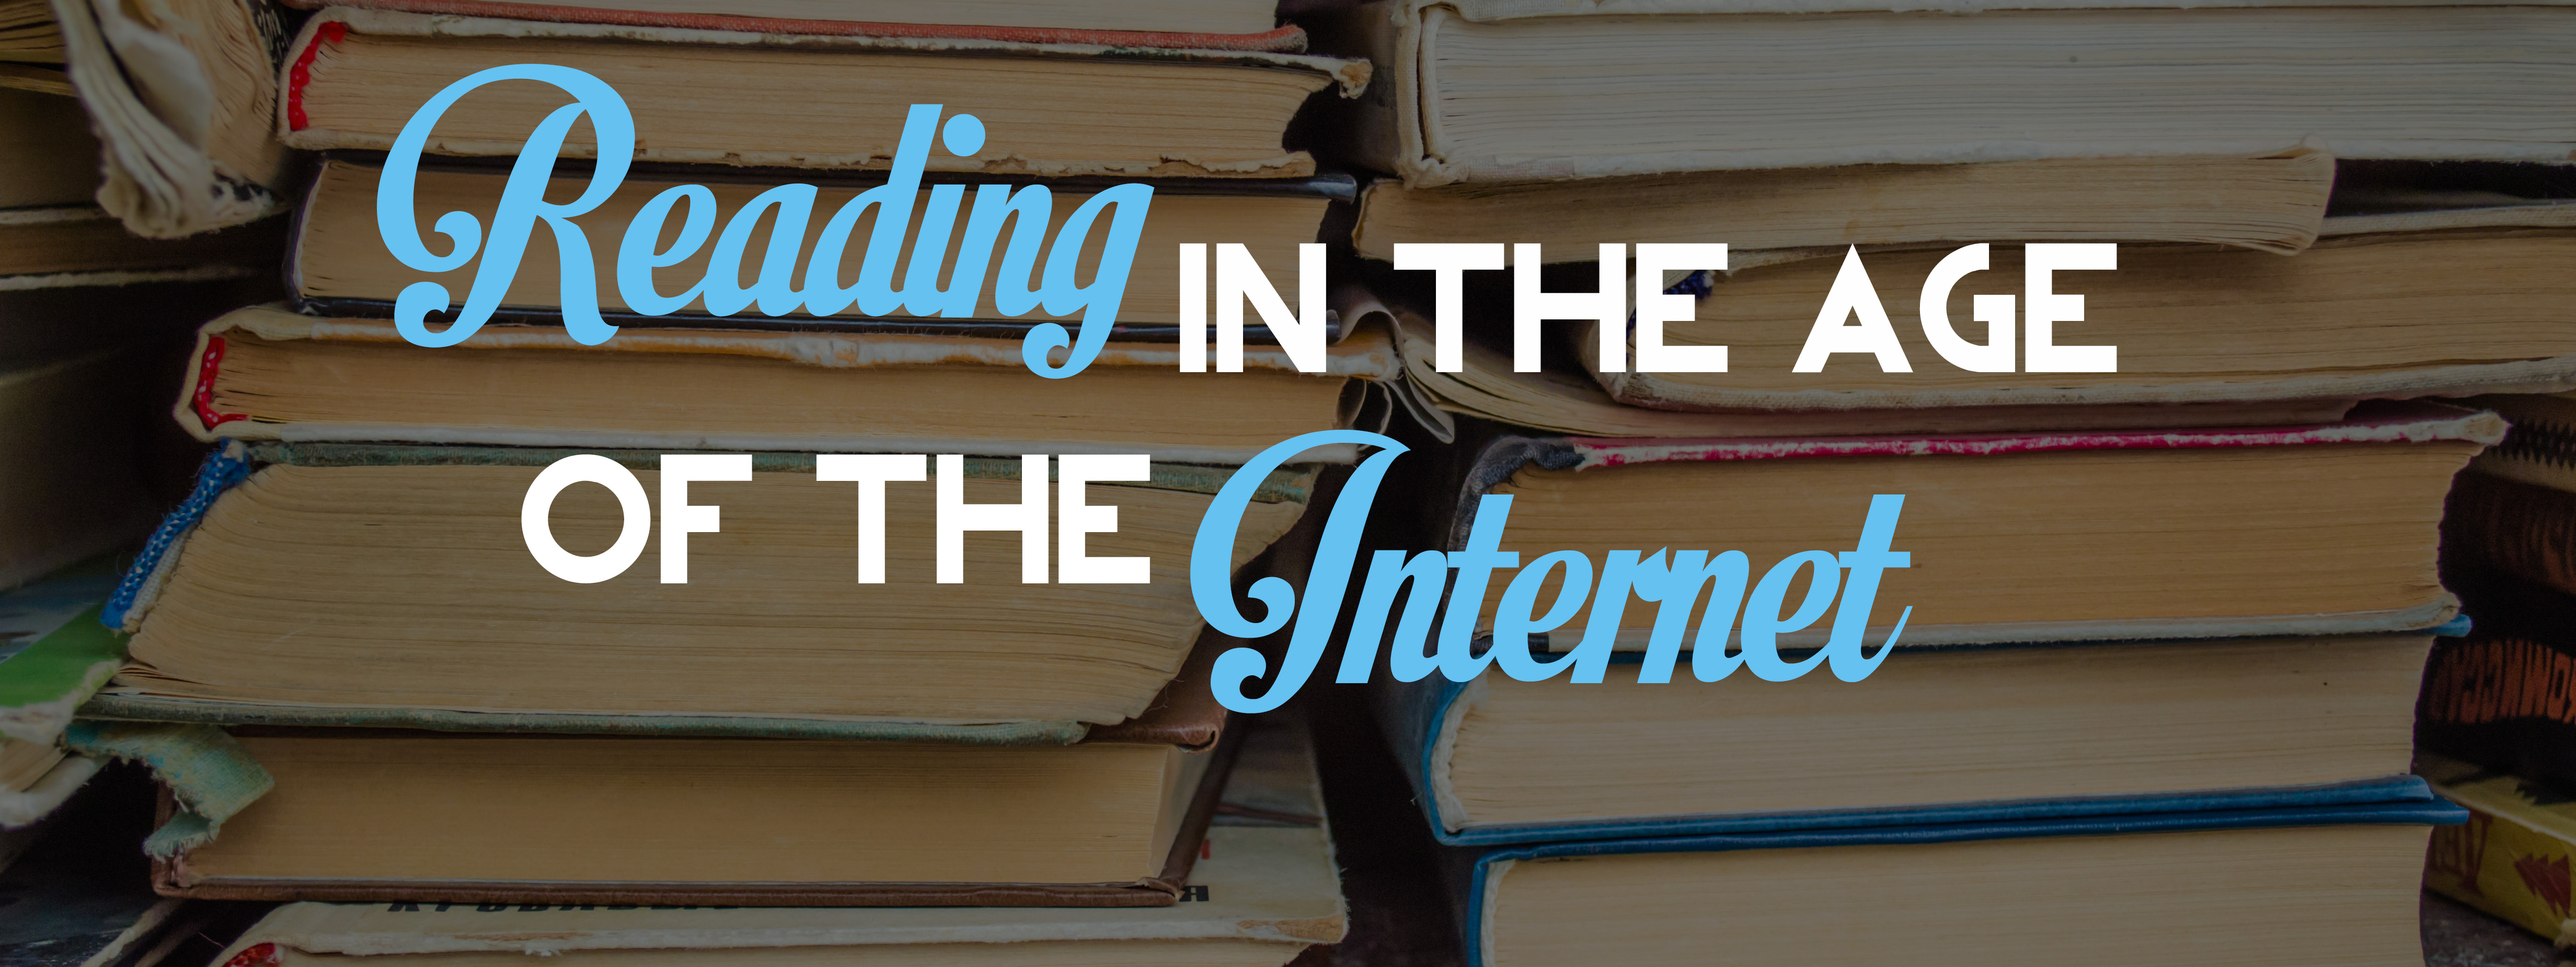 Read in the Age of the Internet